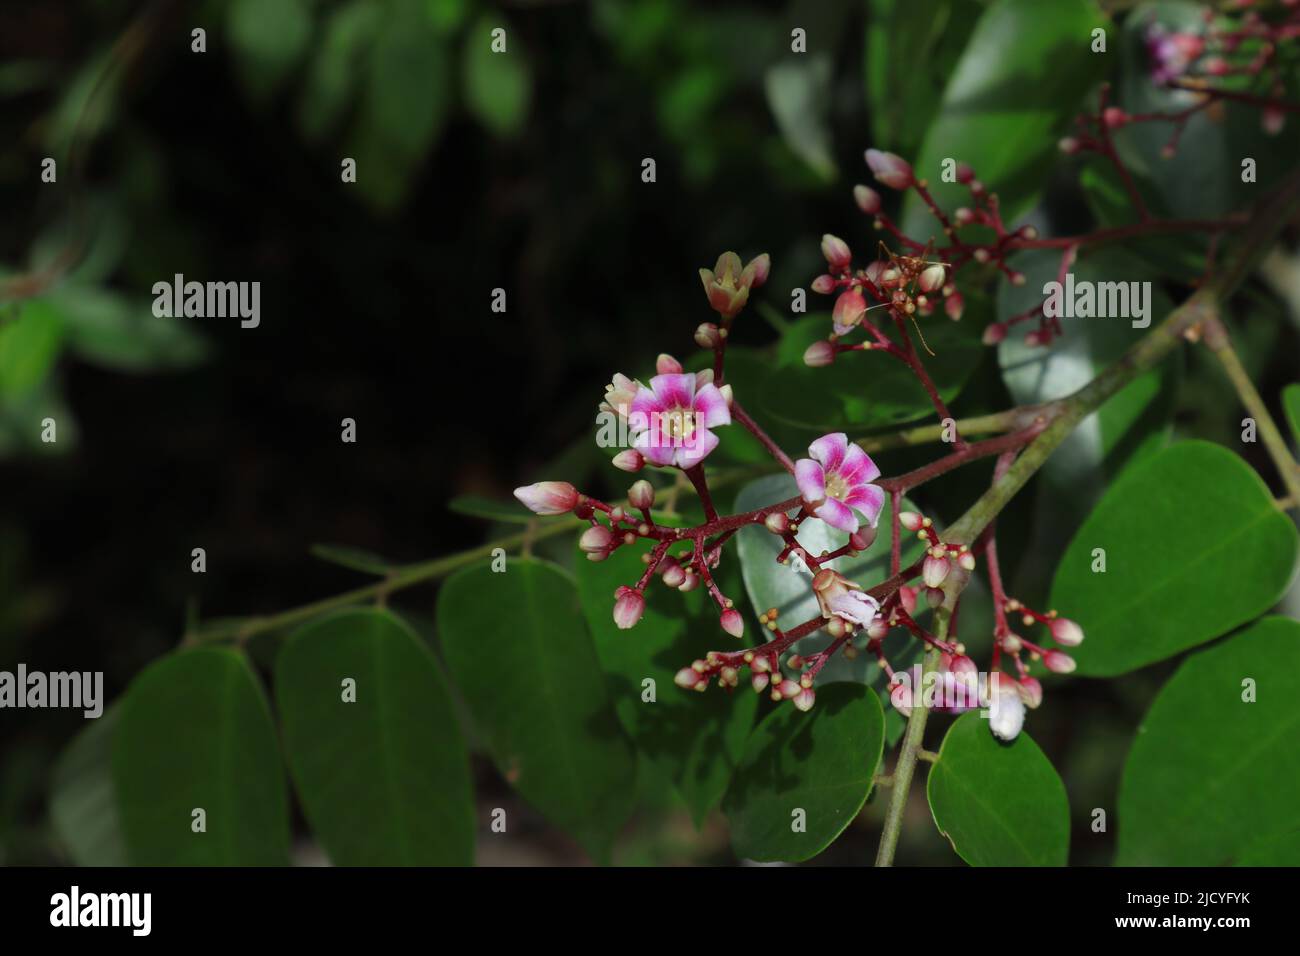 Close up of flowers and buds with a weaving ant over a bud of a starry fruit plant (Carambola) Stock Photo